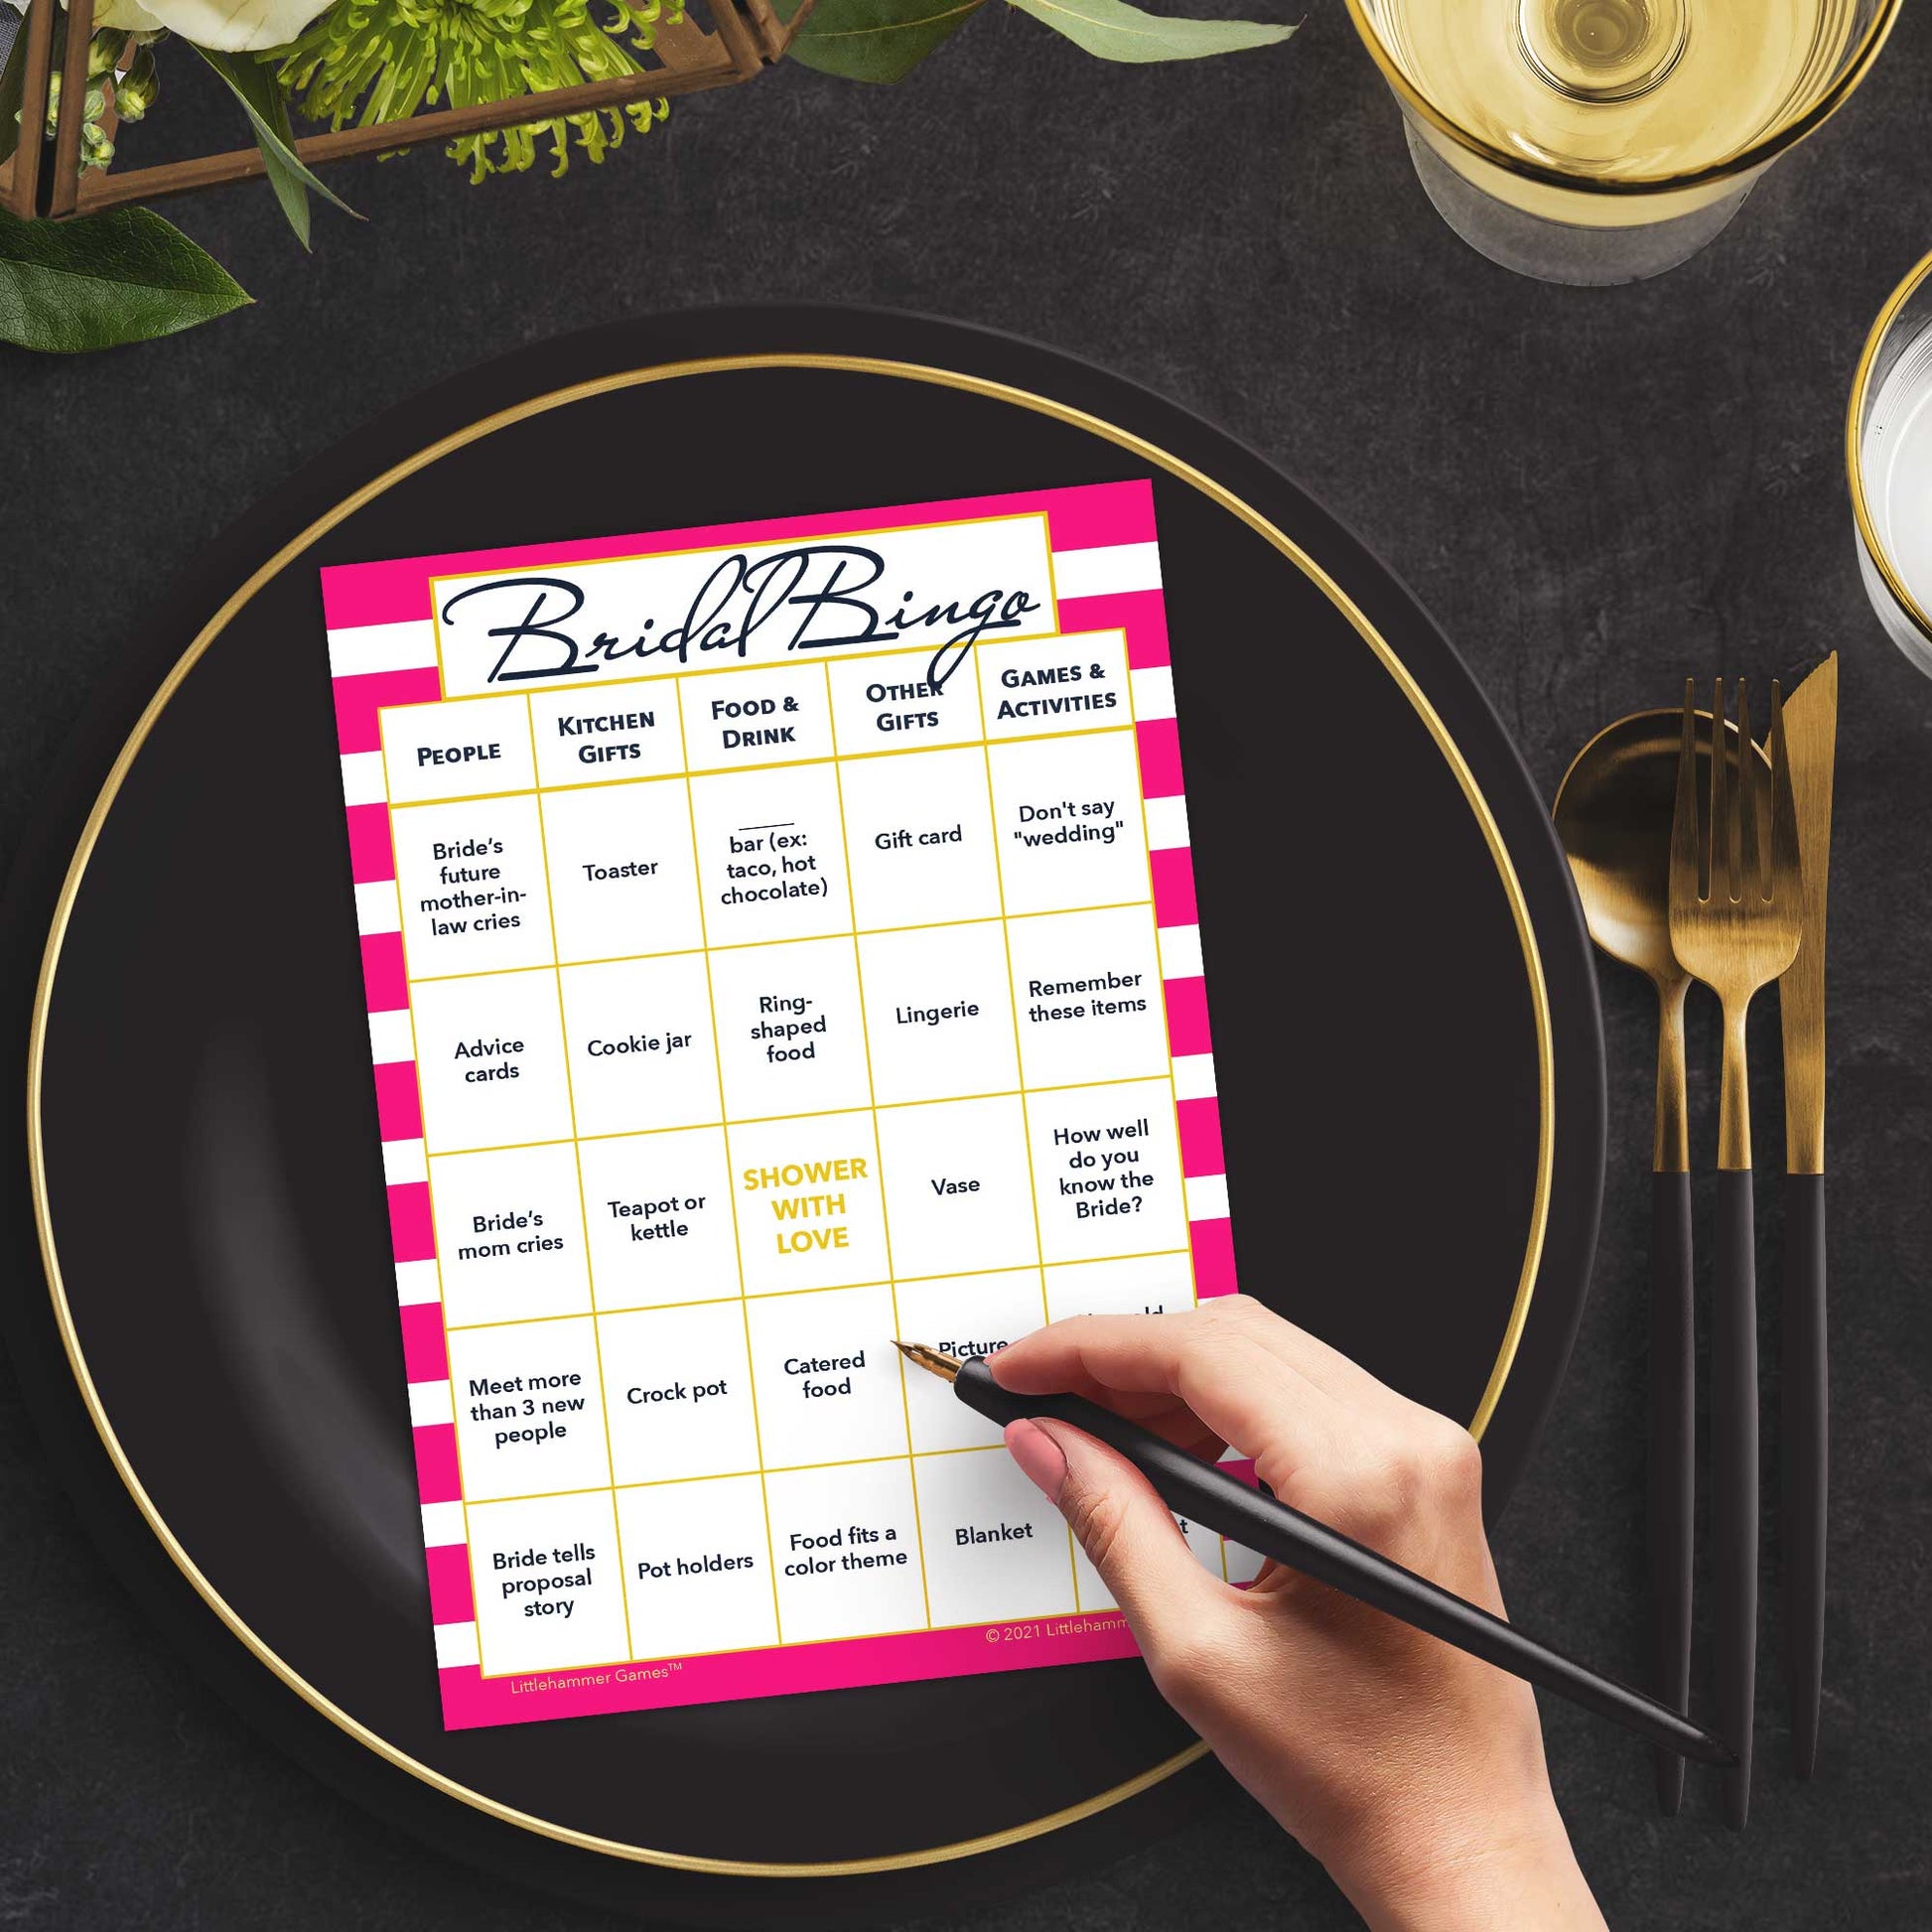 Woman with a pen sitting at a table with a hot pink-striped Bridal Bingo game card on a black and gold plate at a dark place setting